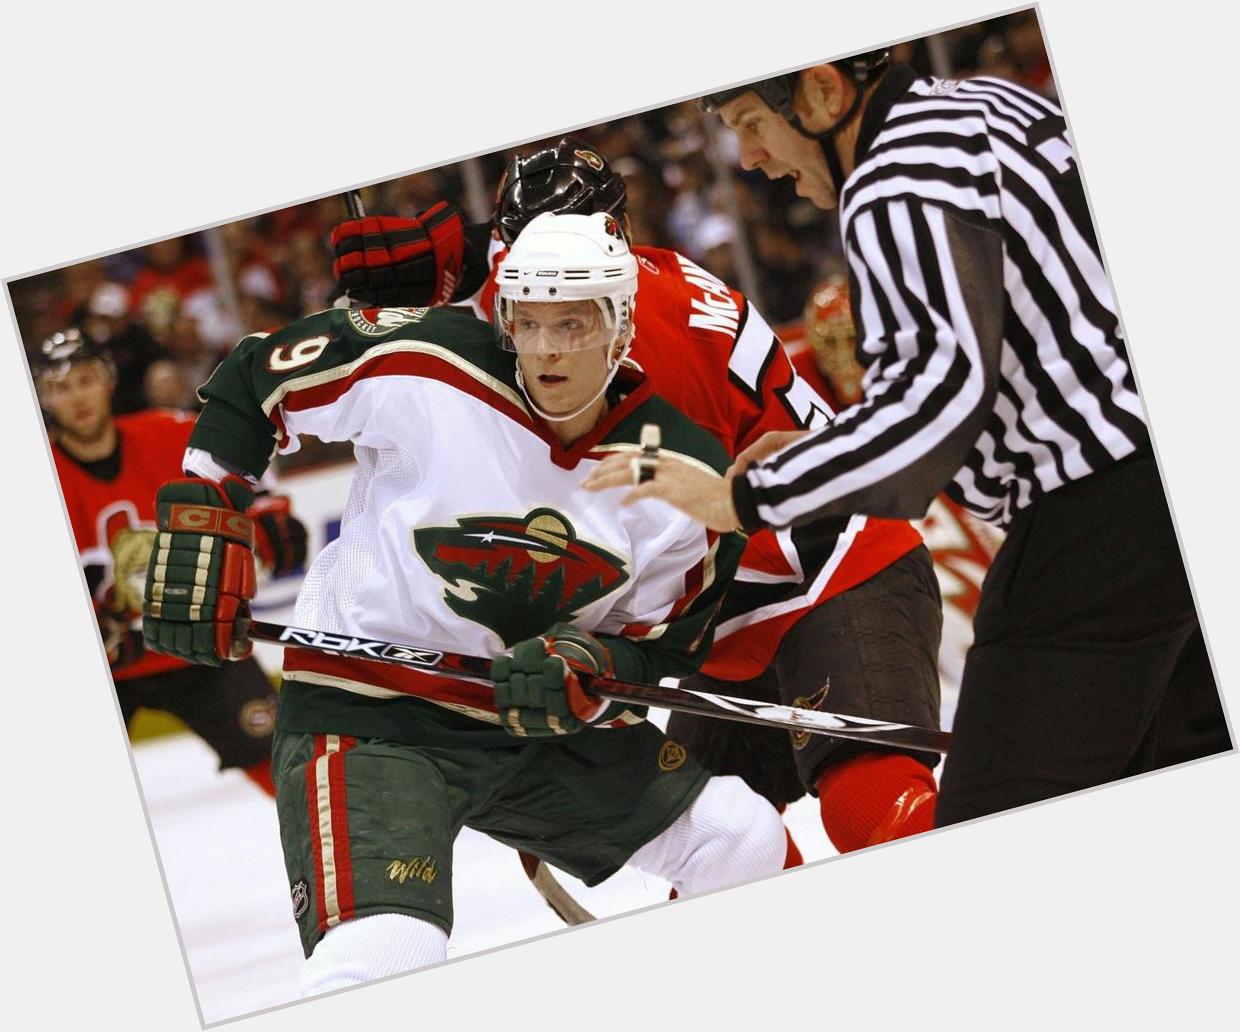 Happy birthday today to NHL center - Mikko Koivu born in Turku, Finland.  Koivu has played with since 2005-06 